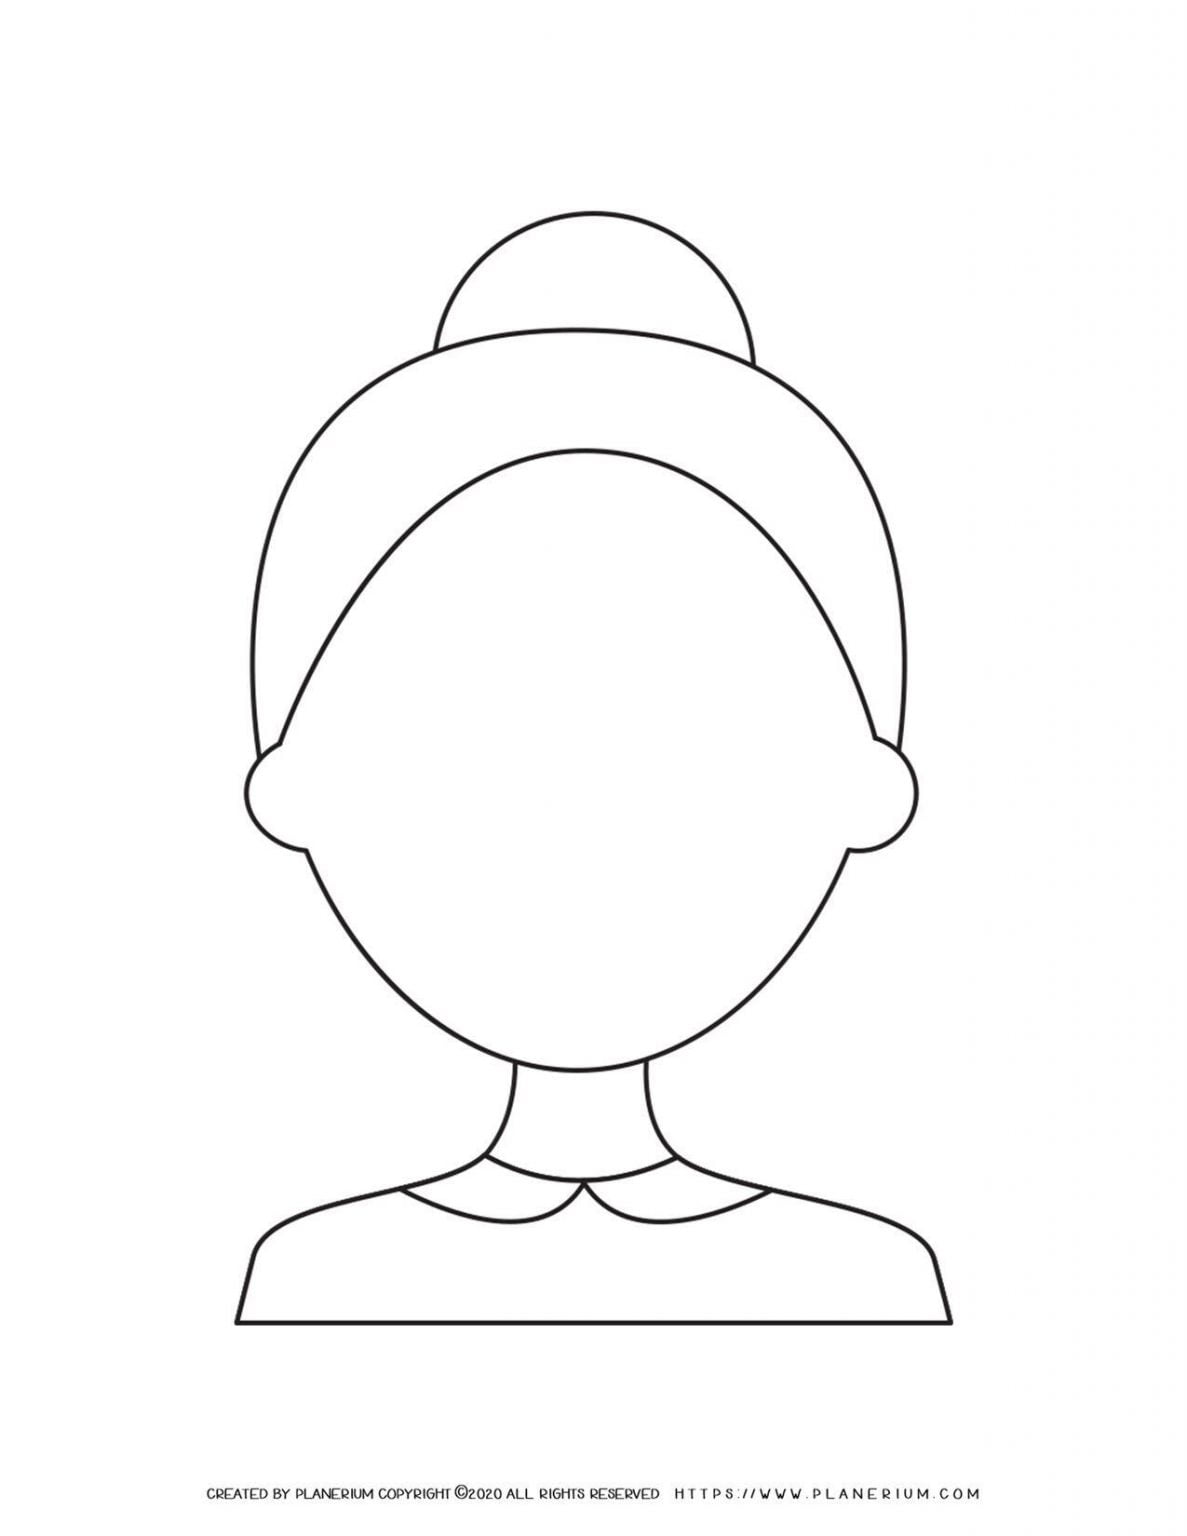 Old Woman Face Outline | Coloring Page | Planerium